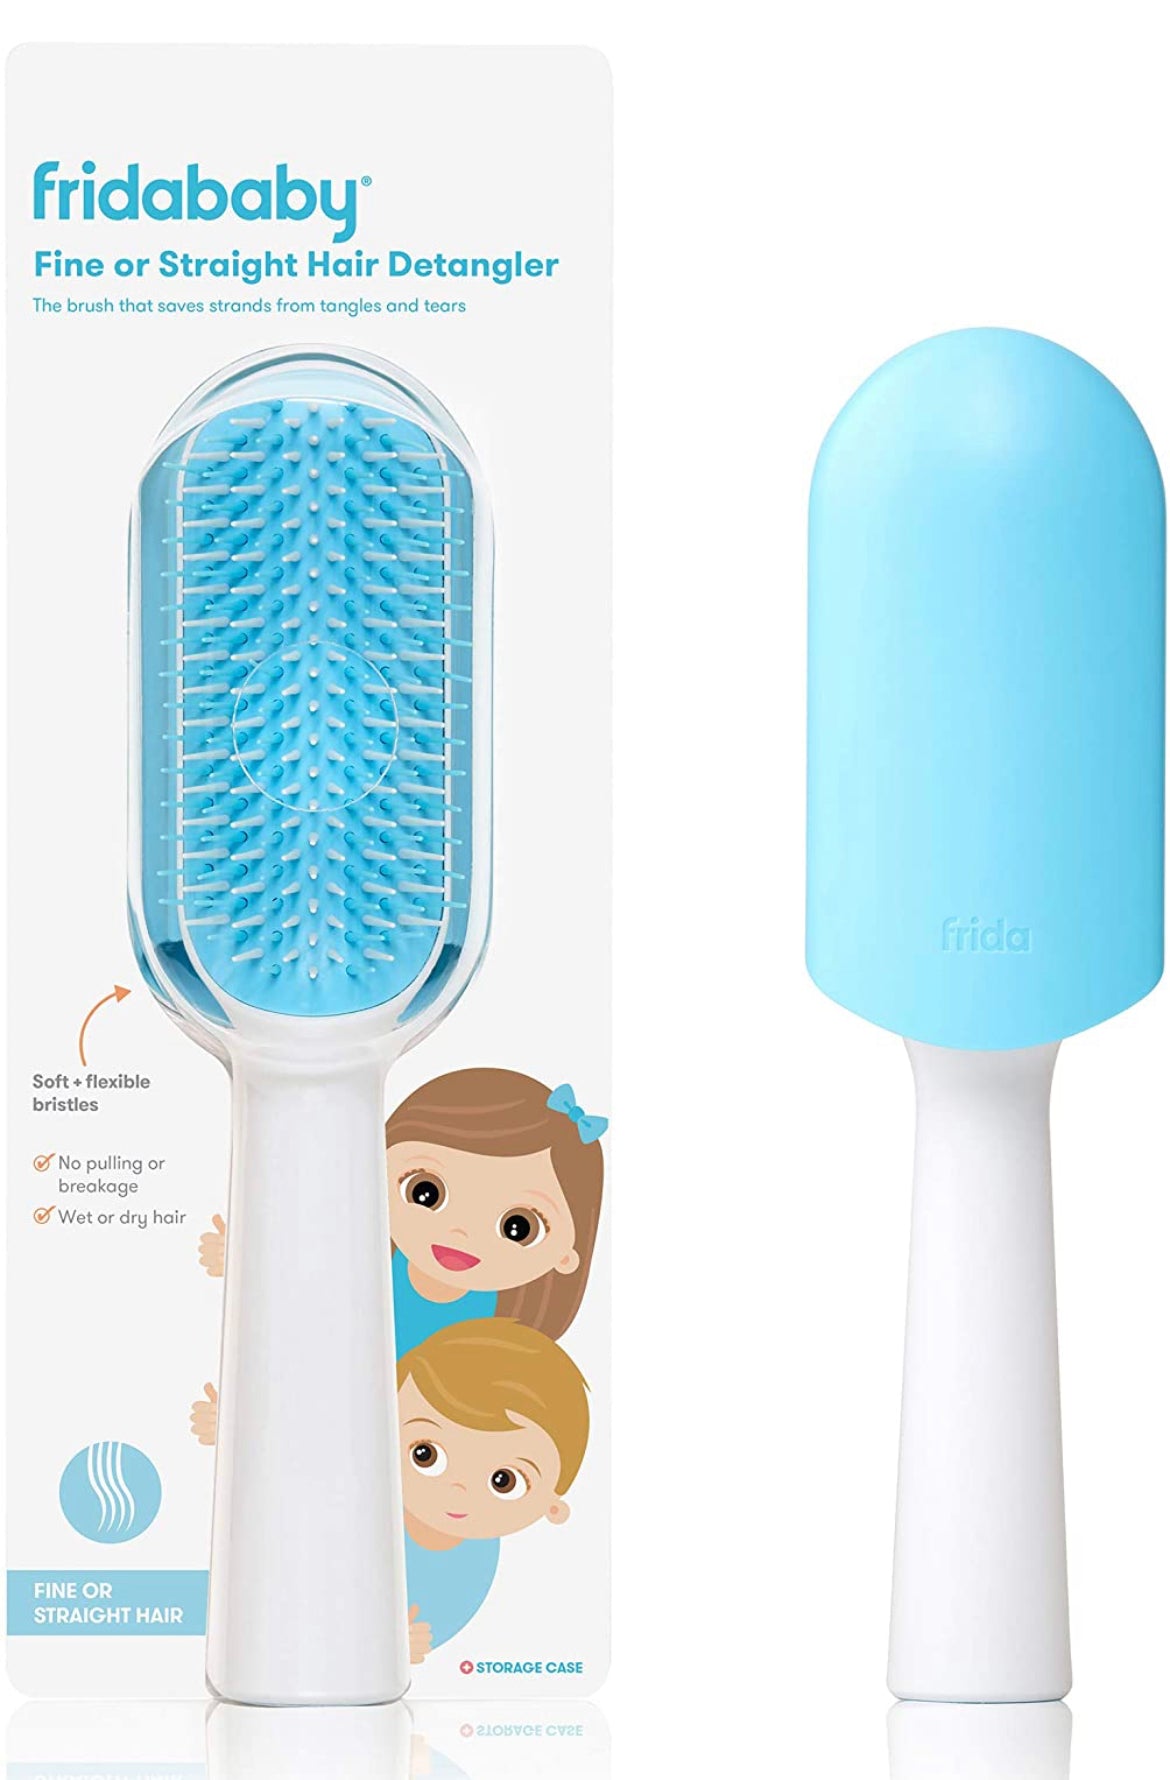 FridaBaby Fine or Straight Hair Detangling Kids Brush, Detangles Knots Without Tears or Breakage, Comb Teeth and Bristle Design.